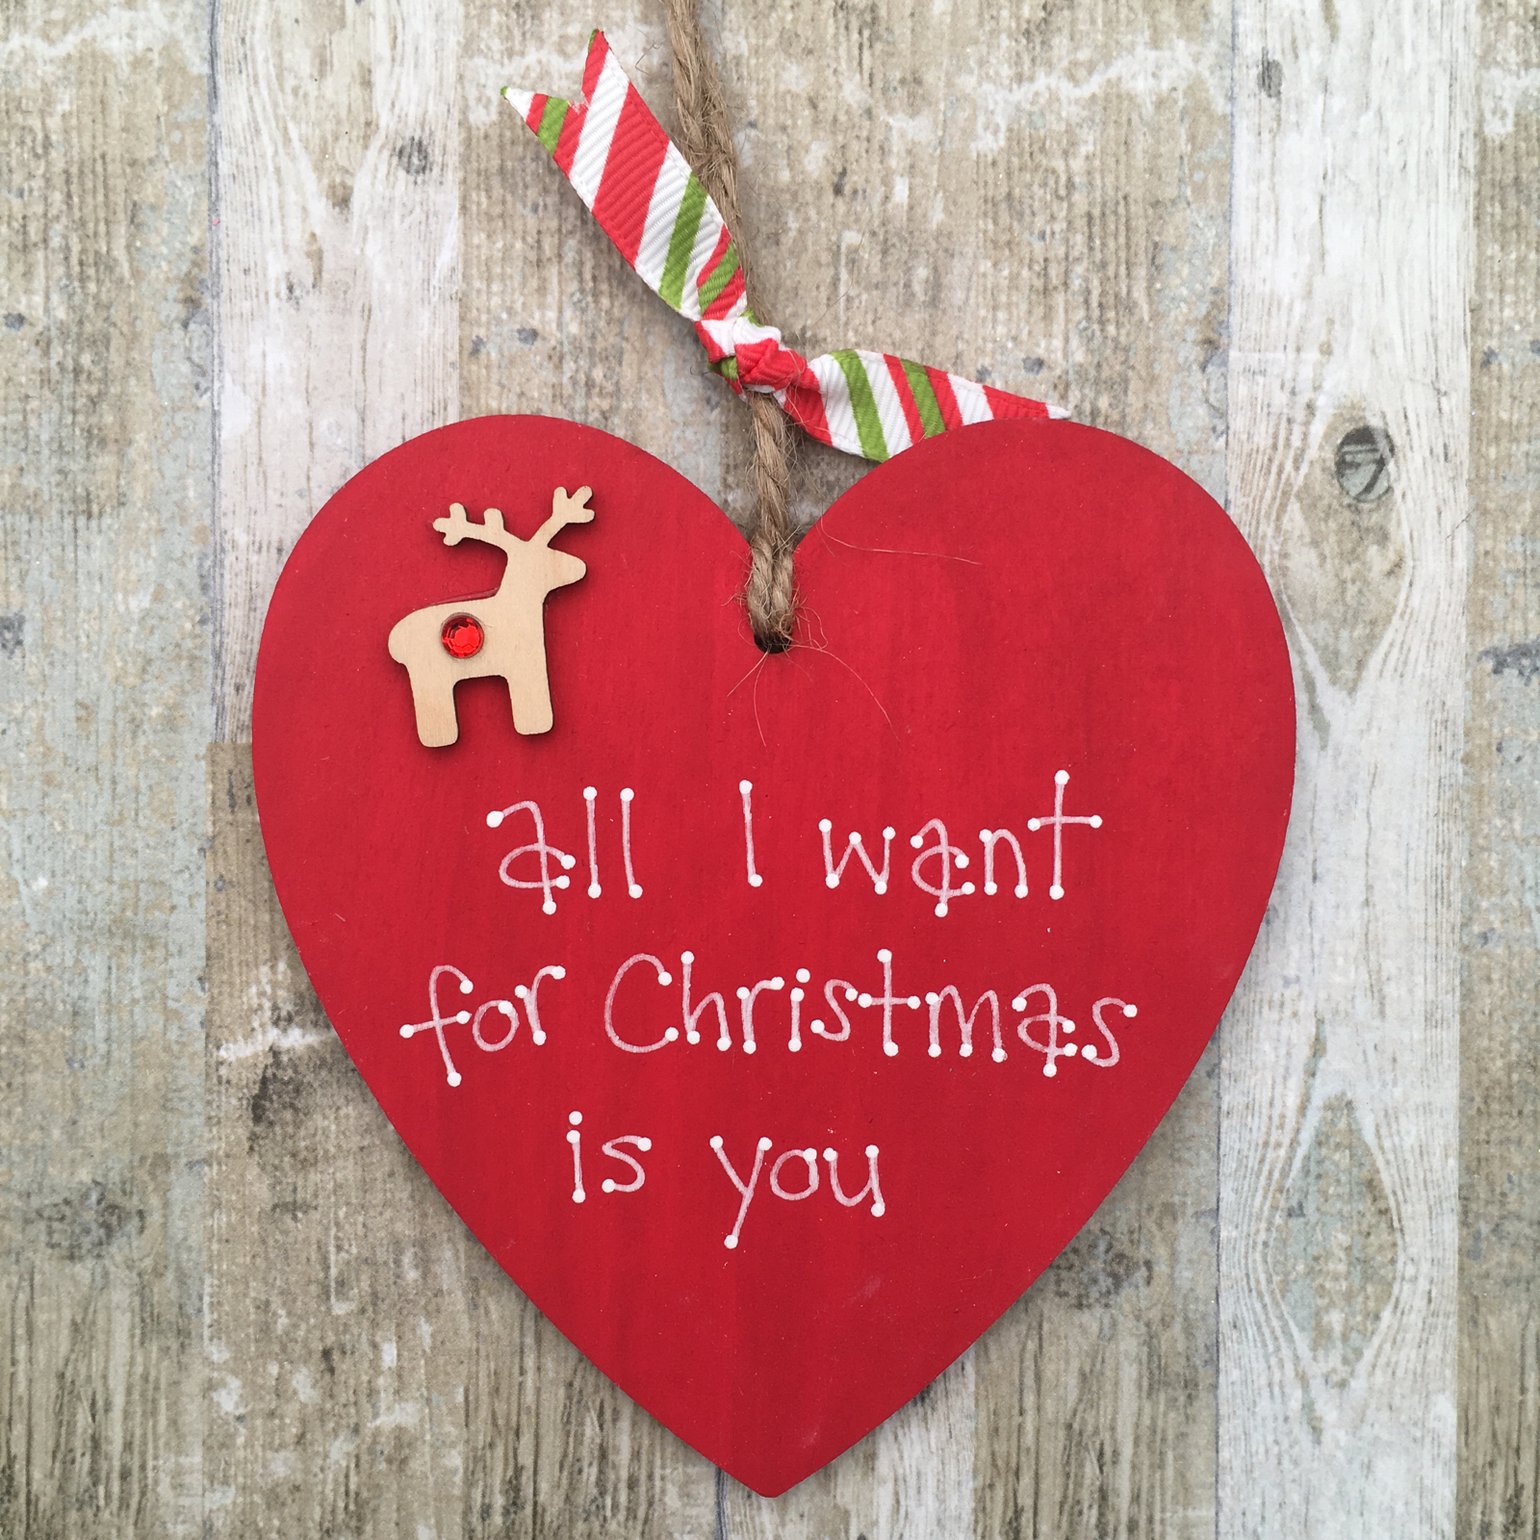 Image of 'All I want for Christmas is you' heart